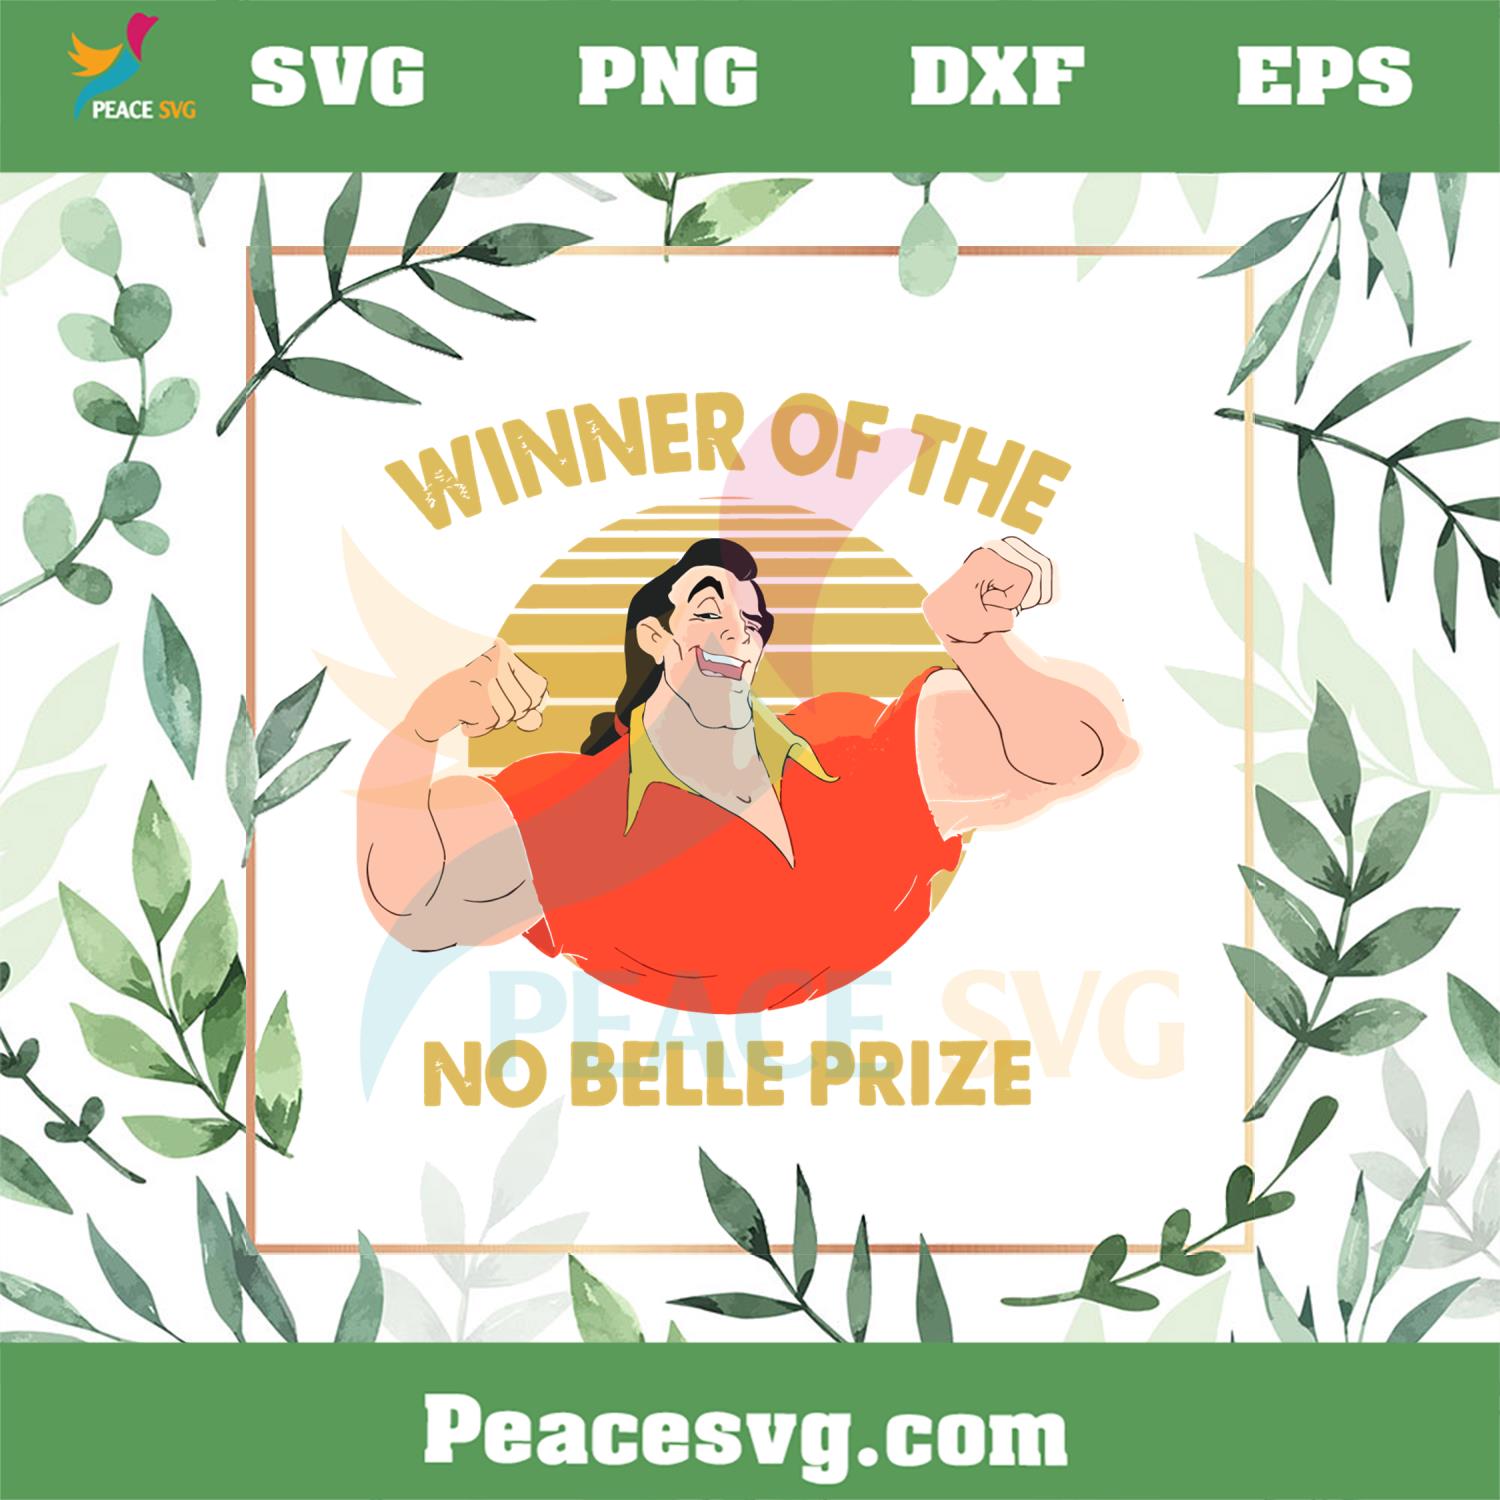 Beauty And The Beast Gaston Winner Of The No Belle Prize Svg Cutting Files